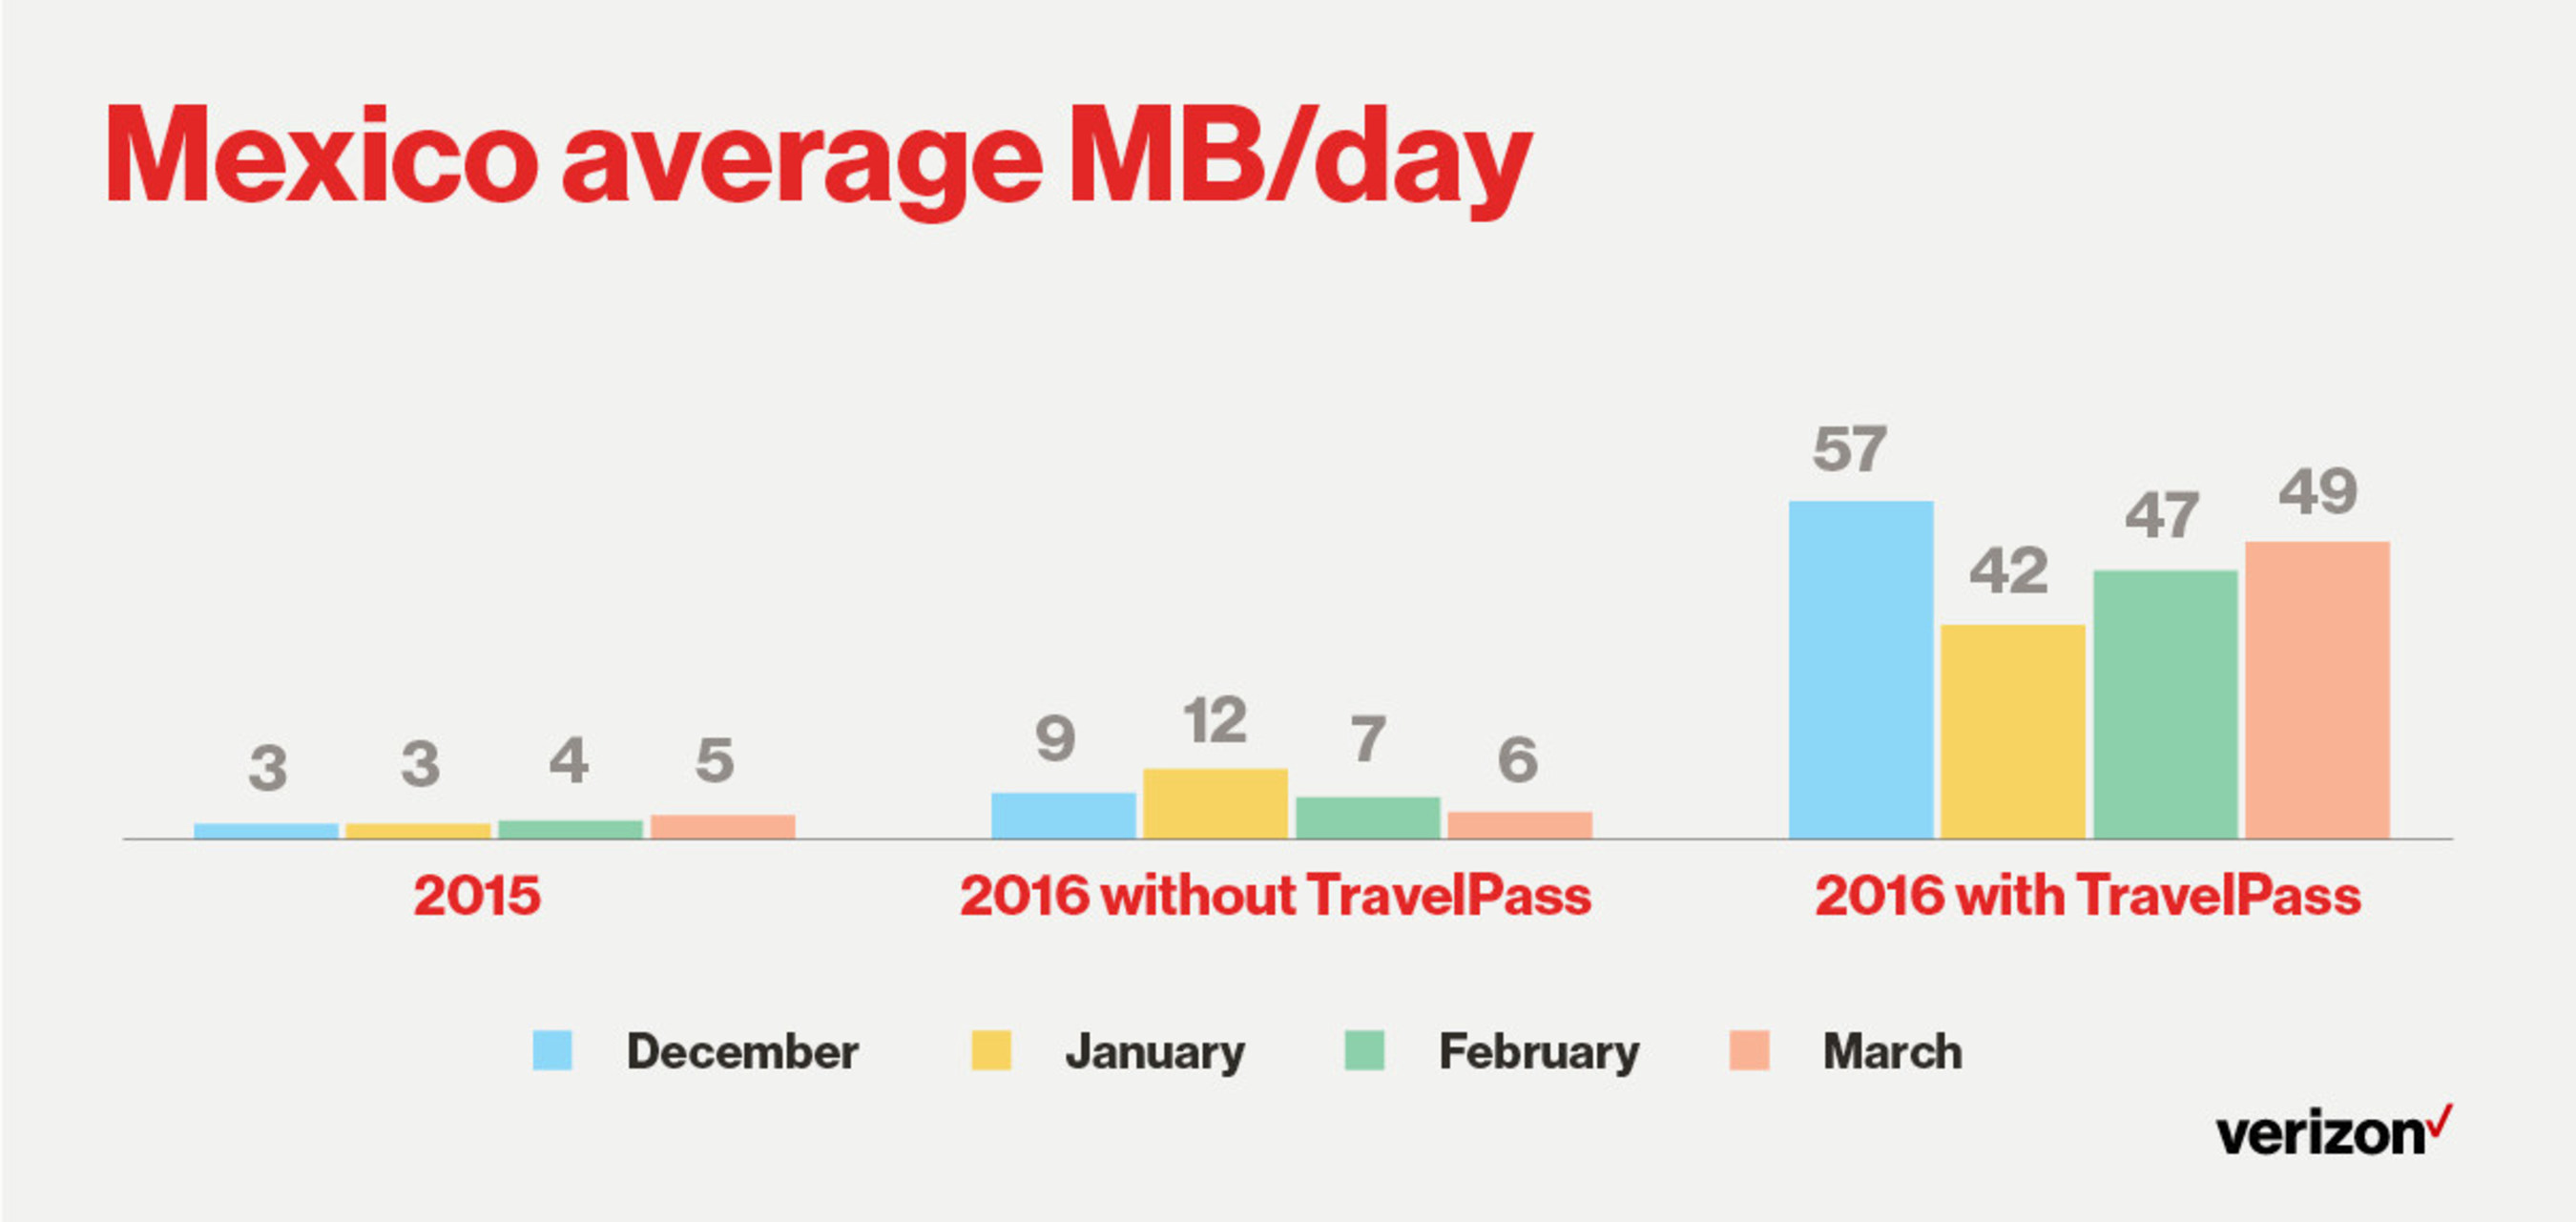 Mexico average MB/day